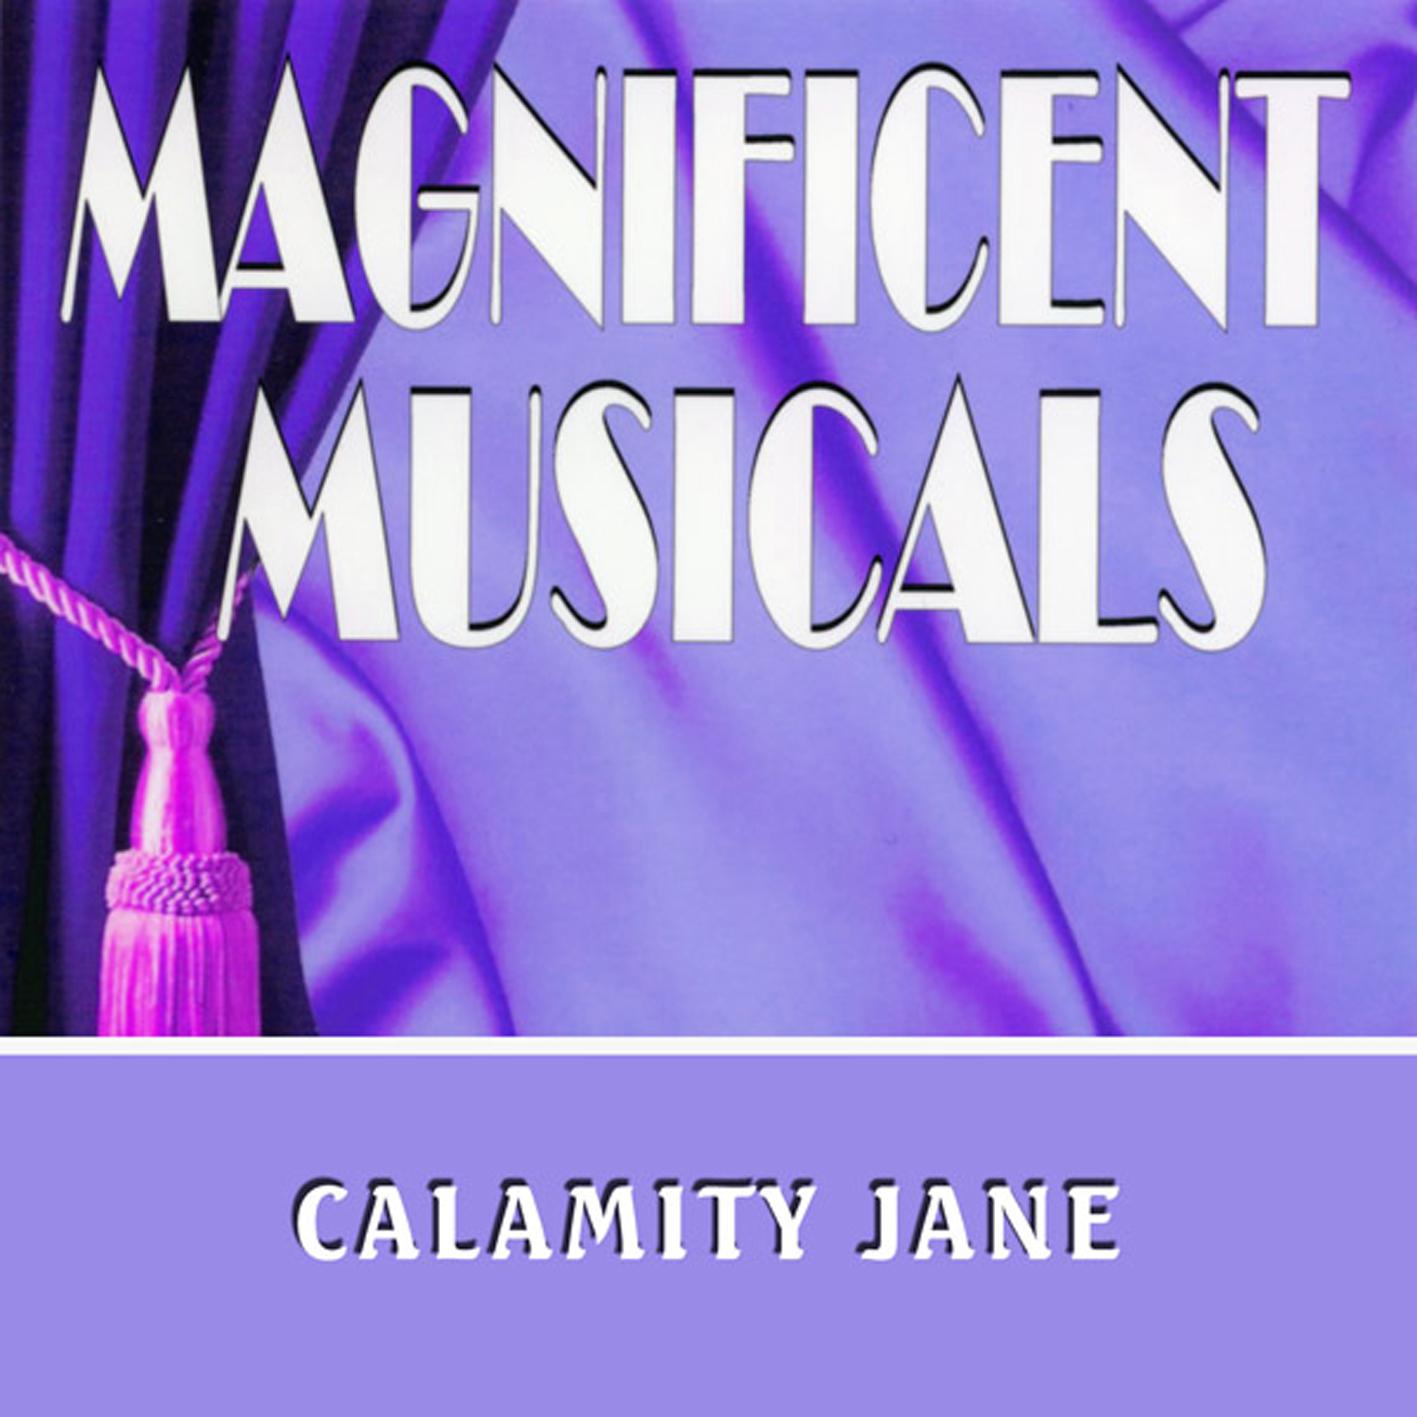 The Magnificent Musicals: Calamity Jane